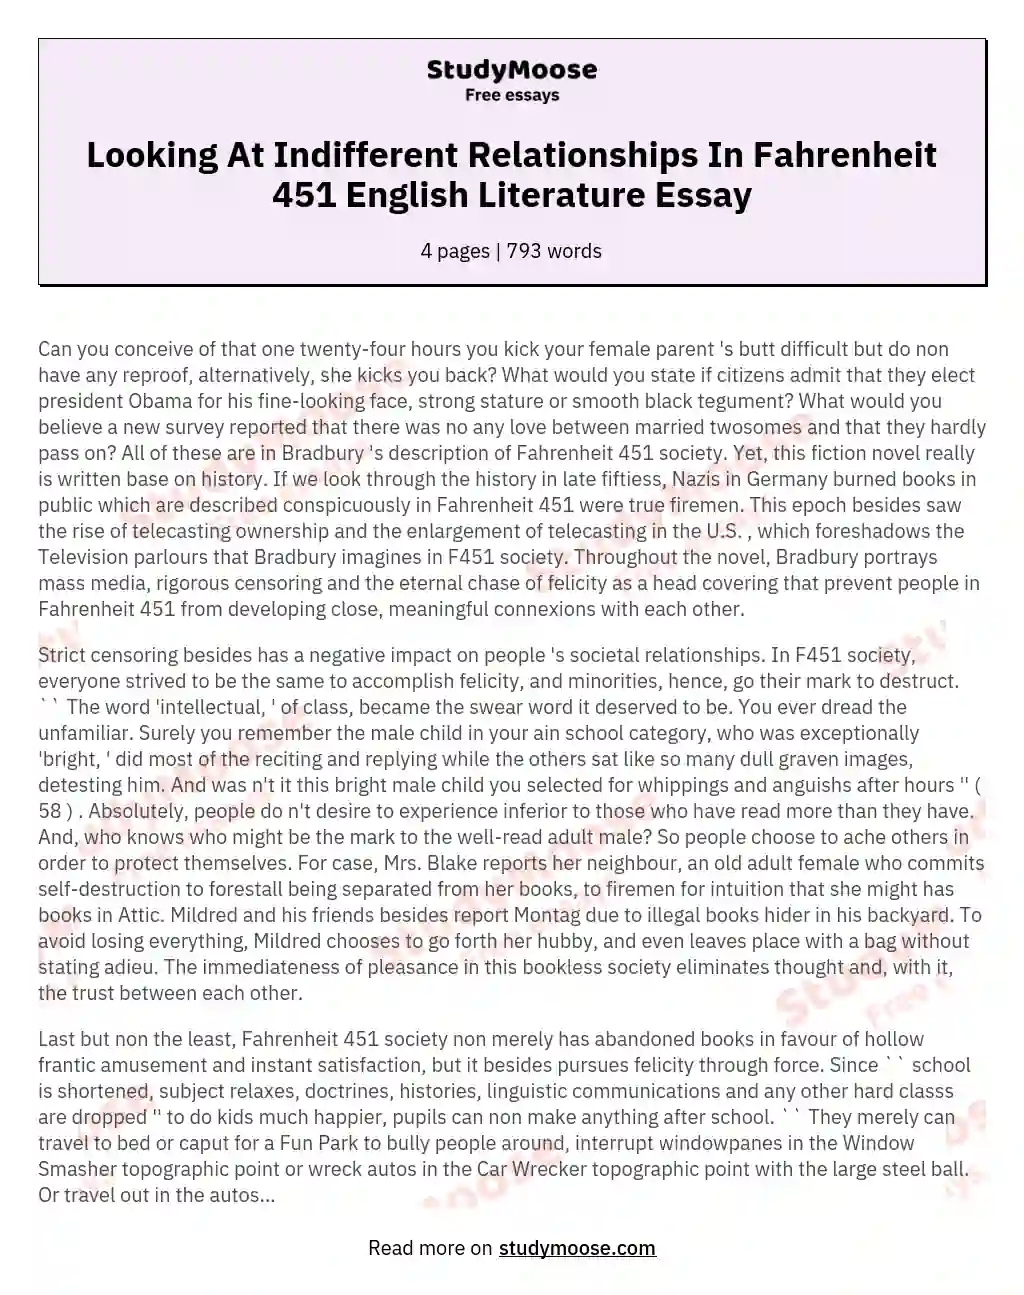 Looking At Indifferent Relationships In Fahrenheit 451 English Literature Essay essay